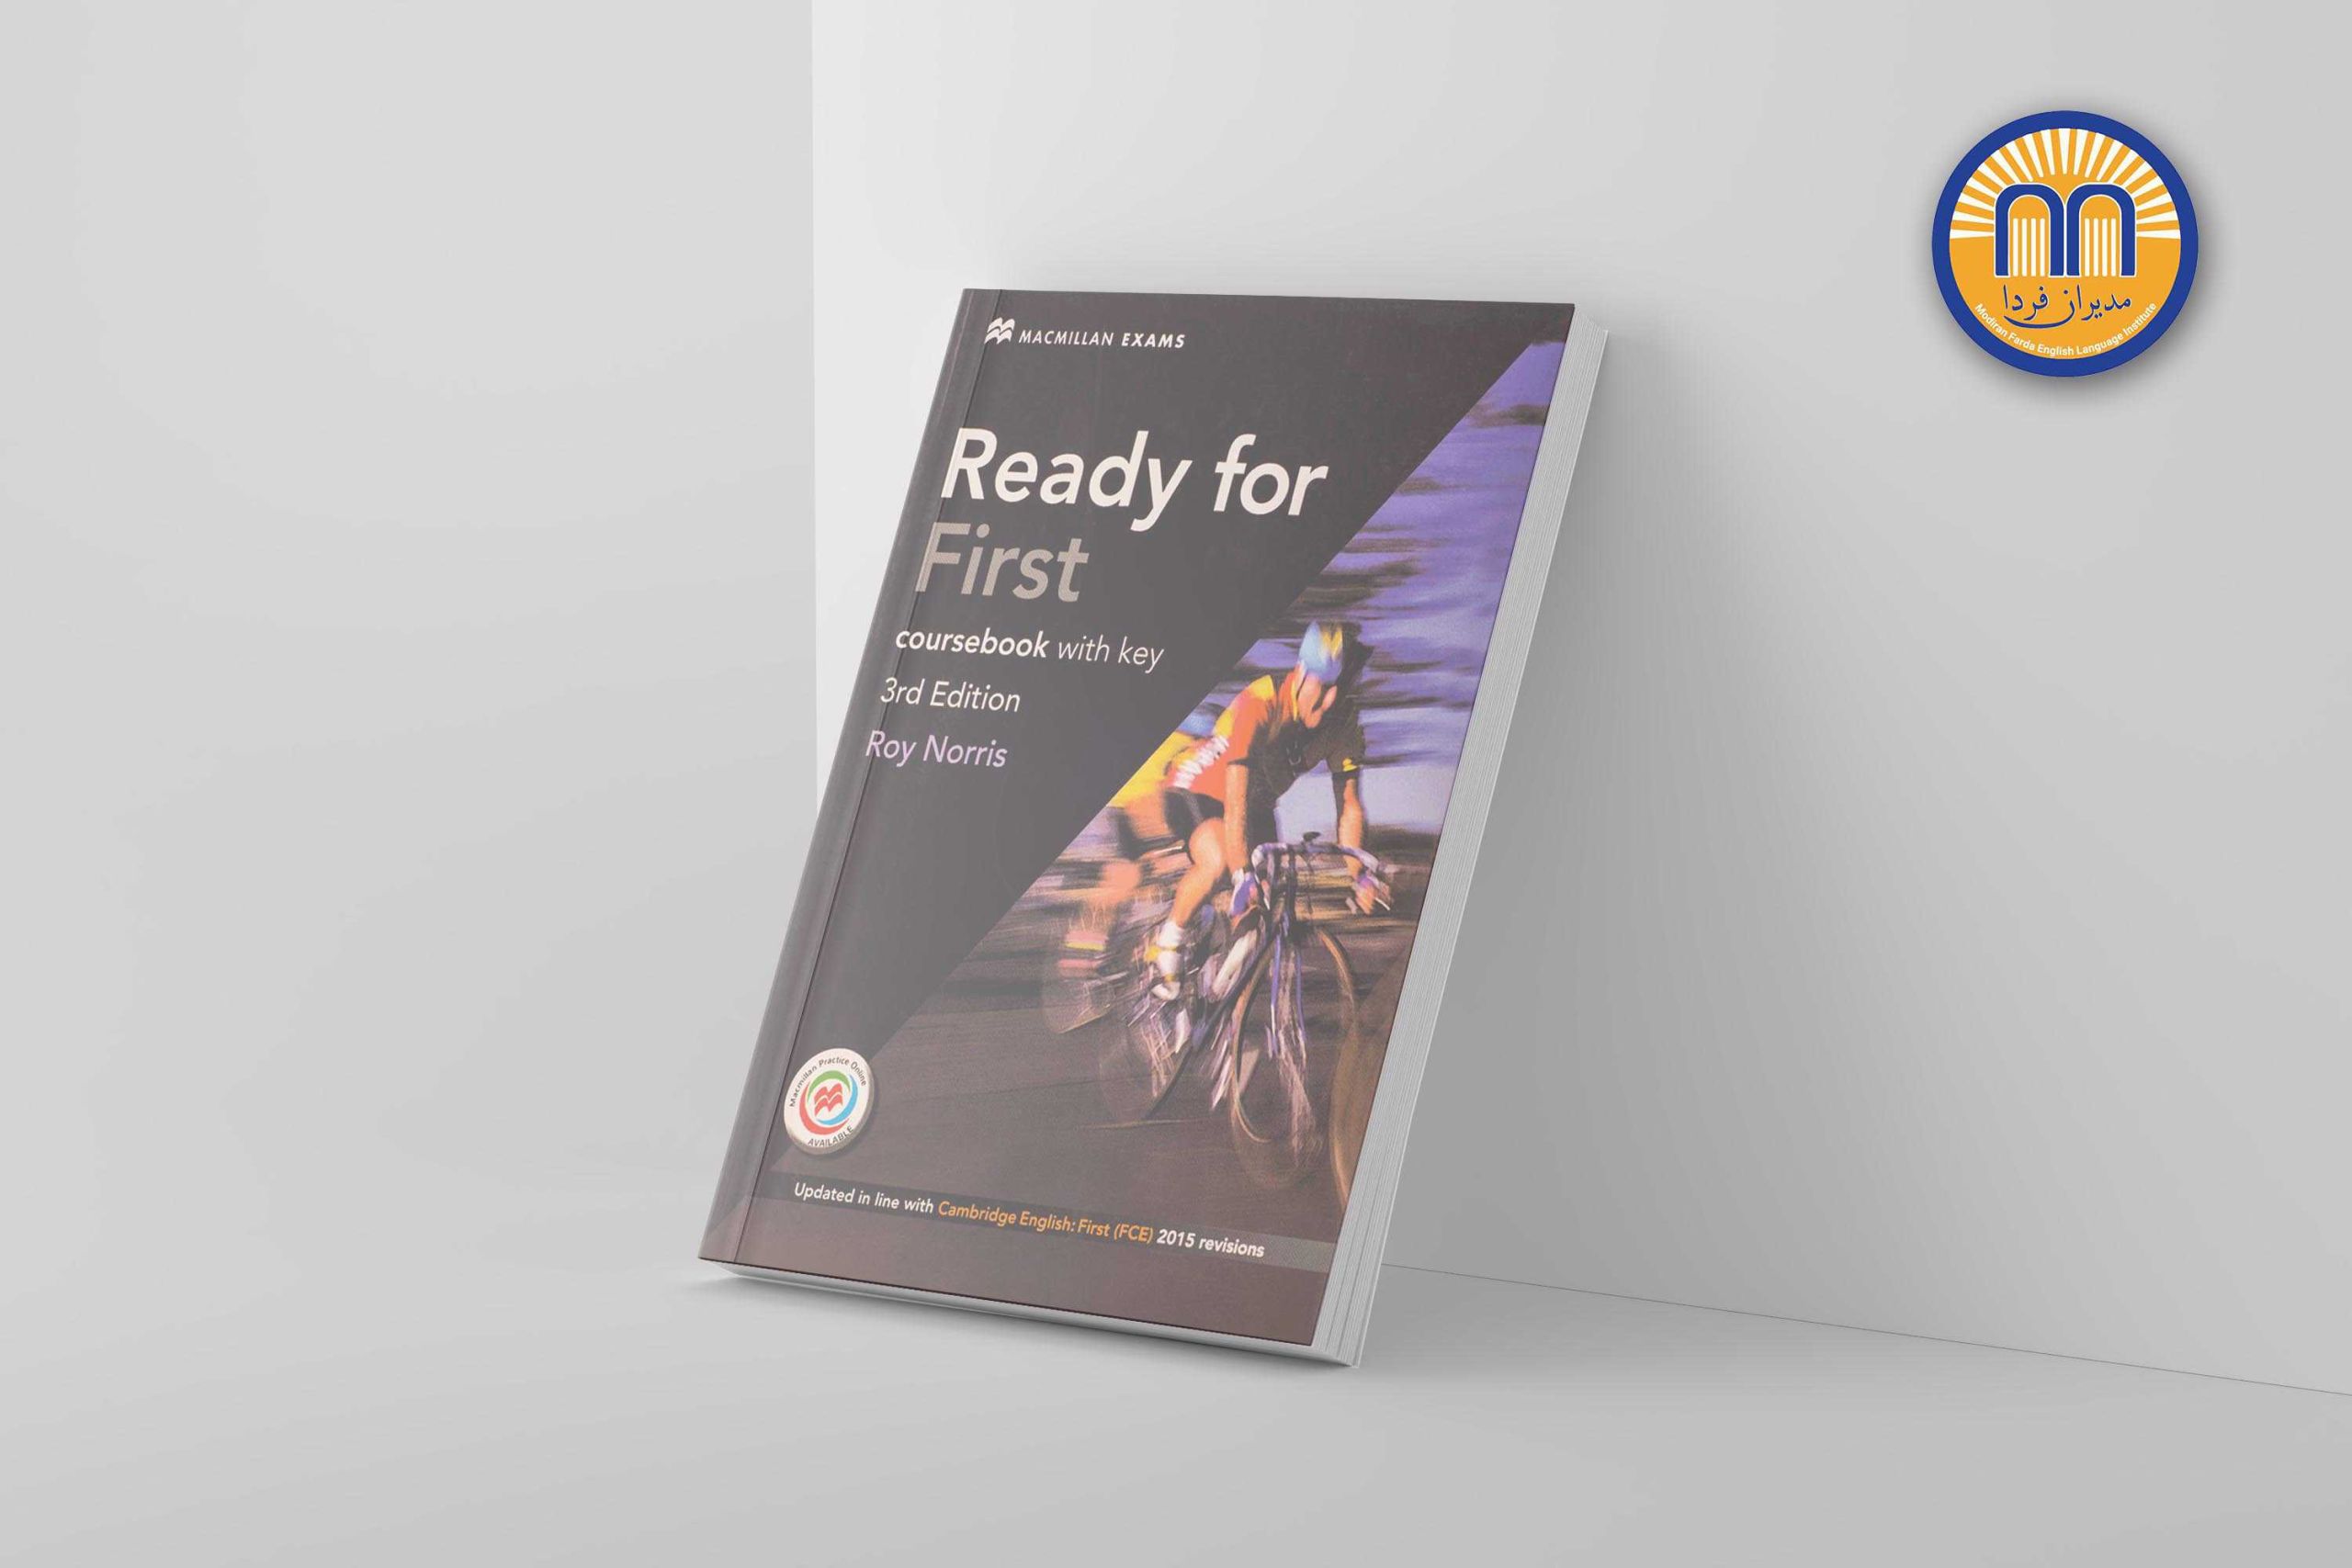 Ready for first (3rd edition) pdf & audios